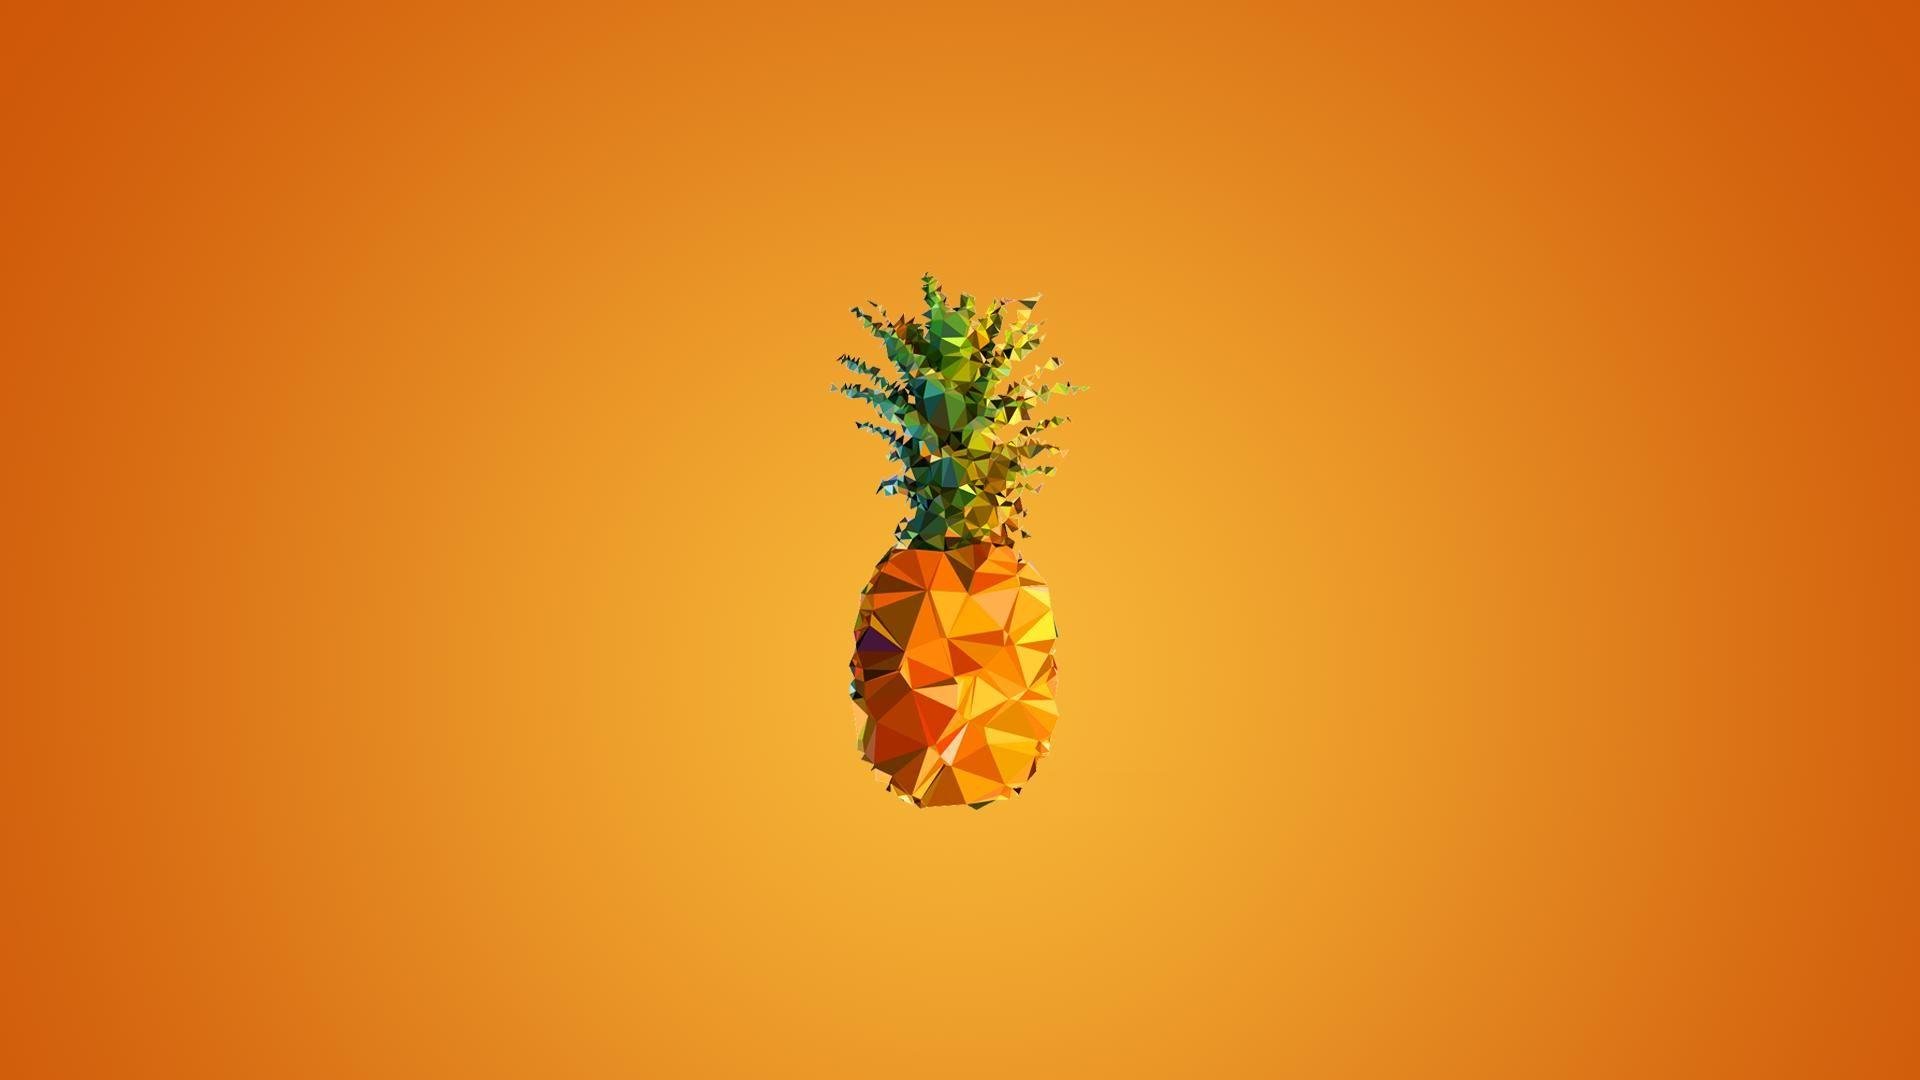 Pineapple Wallpaper, Amazing High Resolution Pineapple Picture